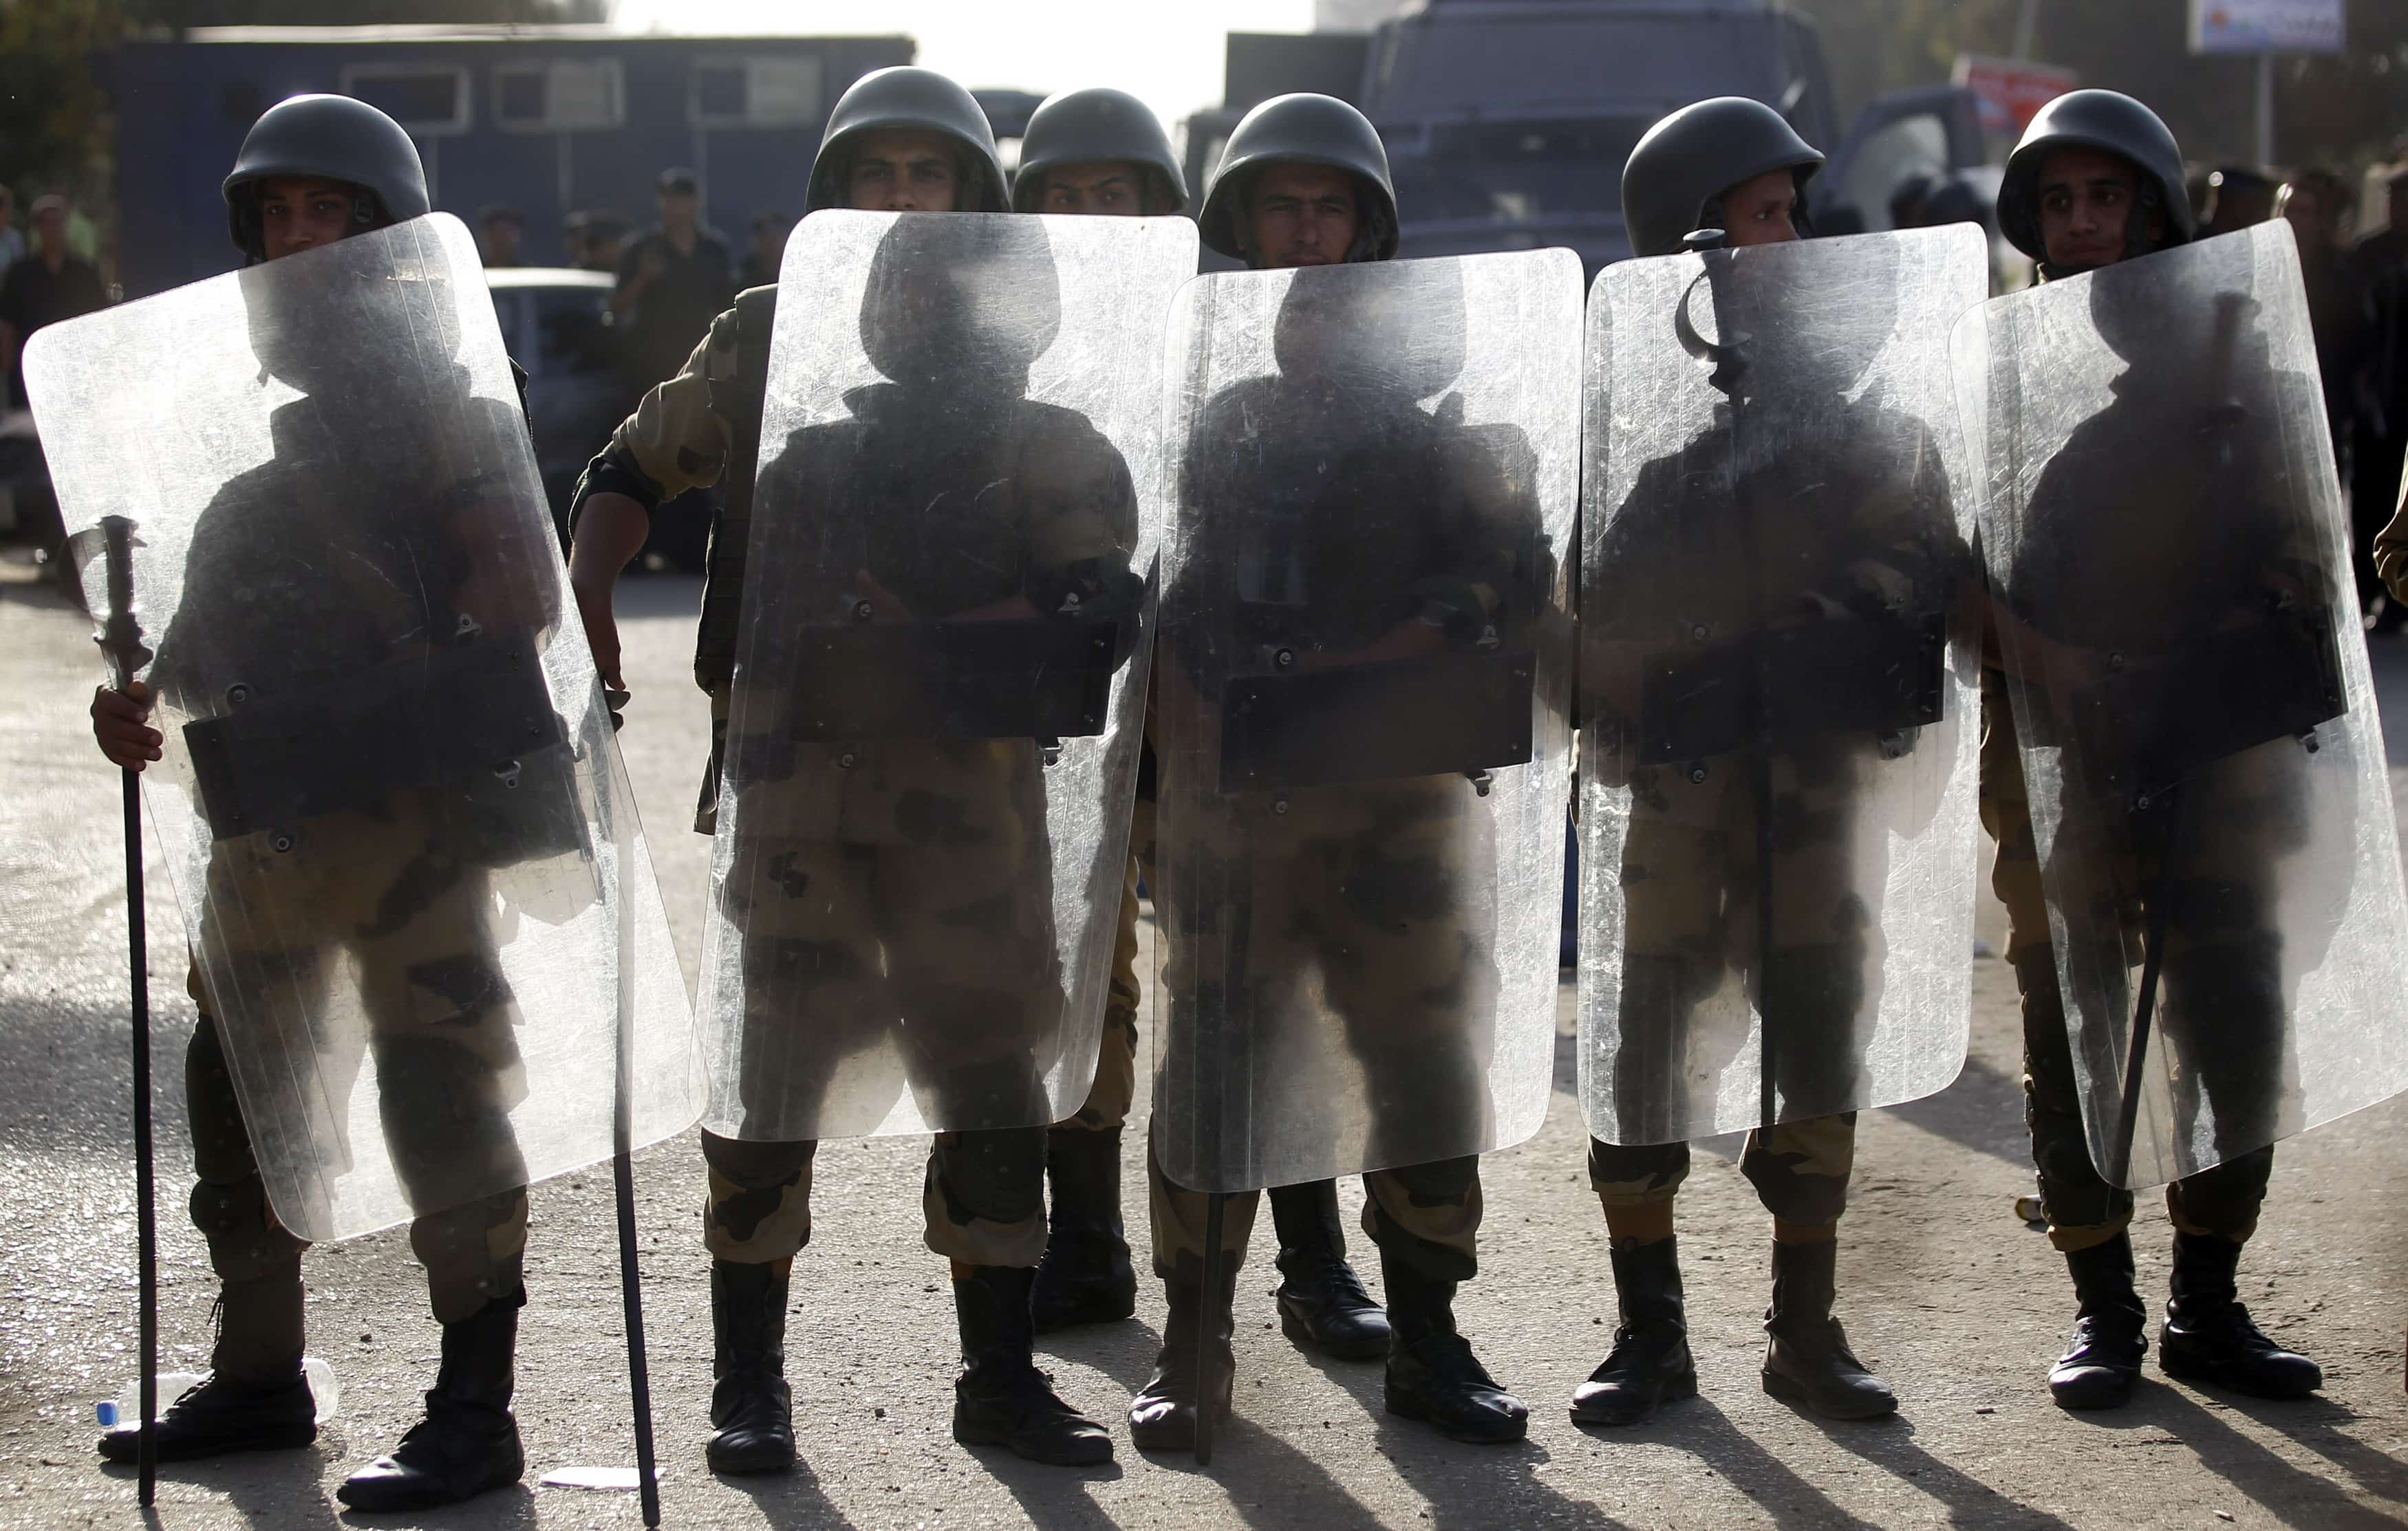 Egyptian soldiers stand guard during a protest by members and supporters of the Muslim Brotherhood in Cairo on 4 October 2013, REUTERS/Amr Abdallah Dalsh